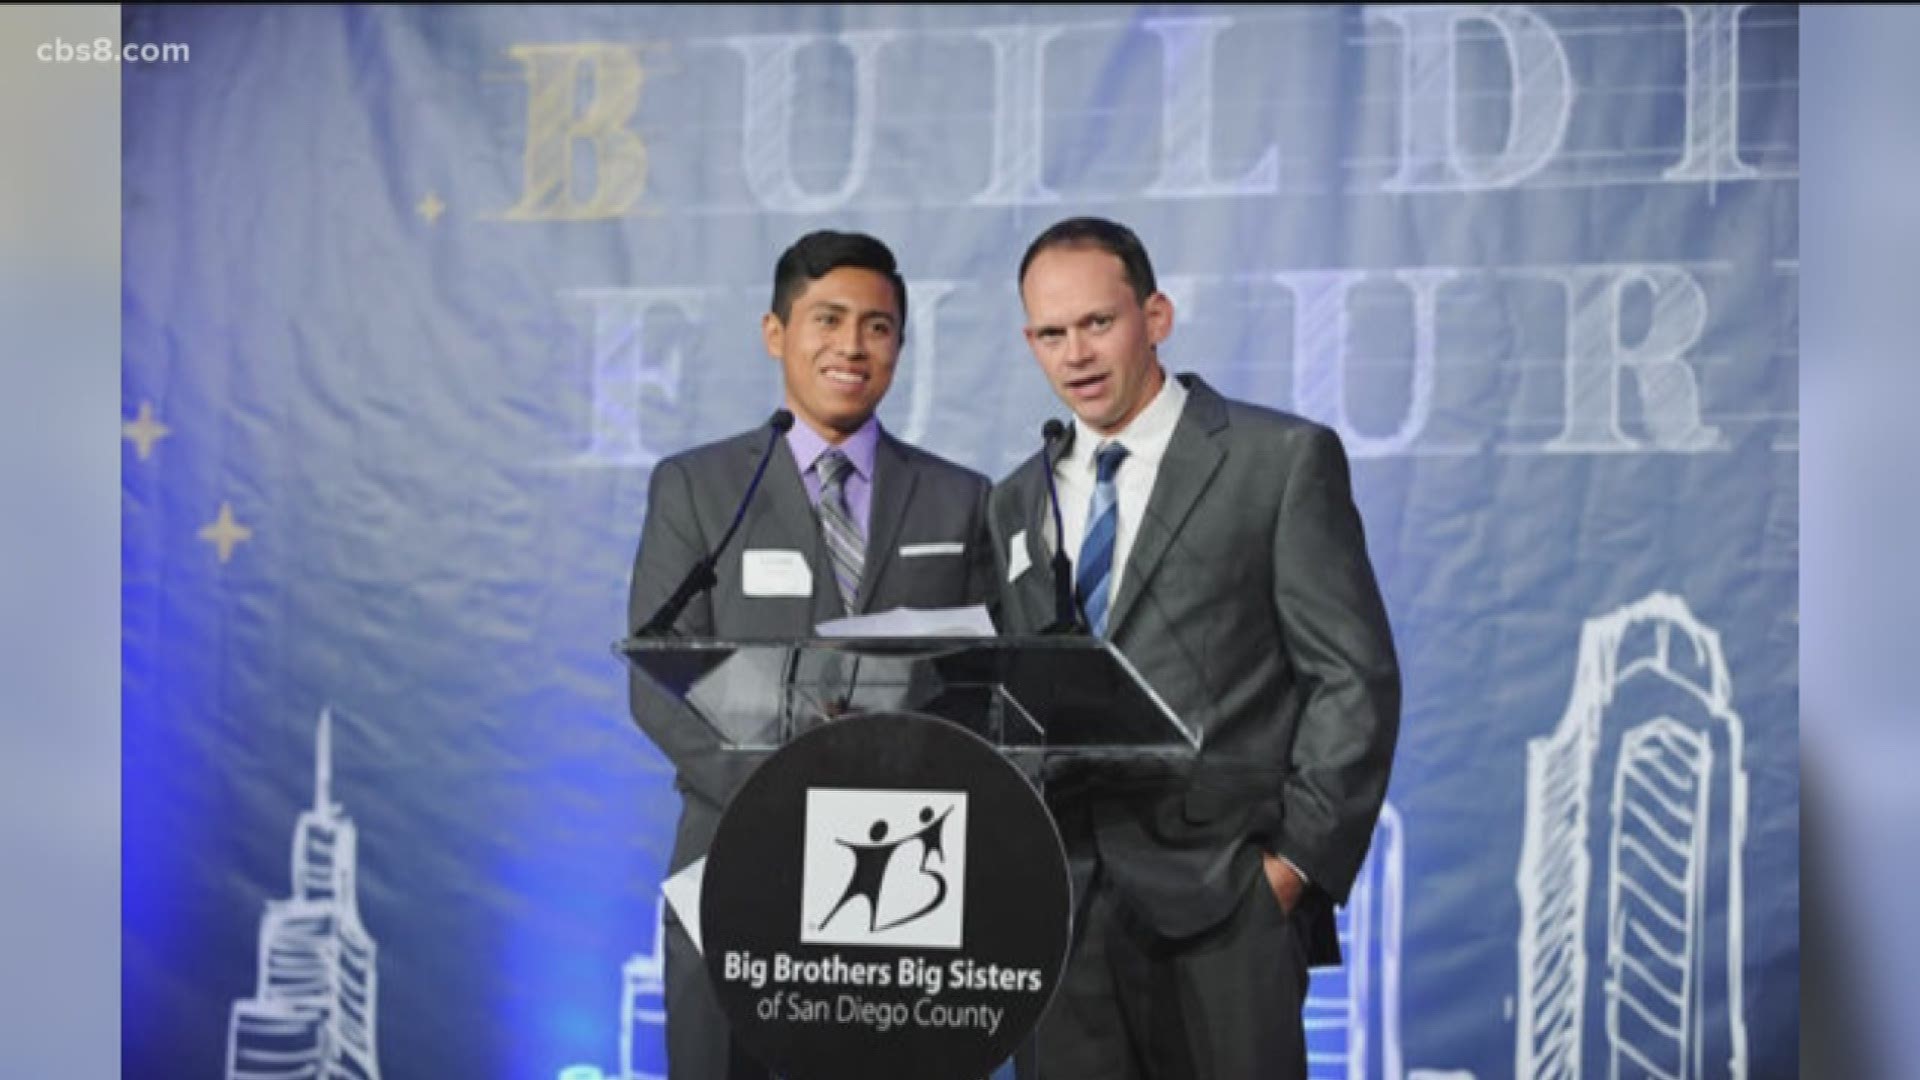 Luis’ story is one of many bright, BIG futures Big Brothers Big Sisters building through mentoring